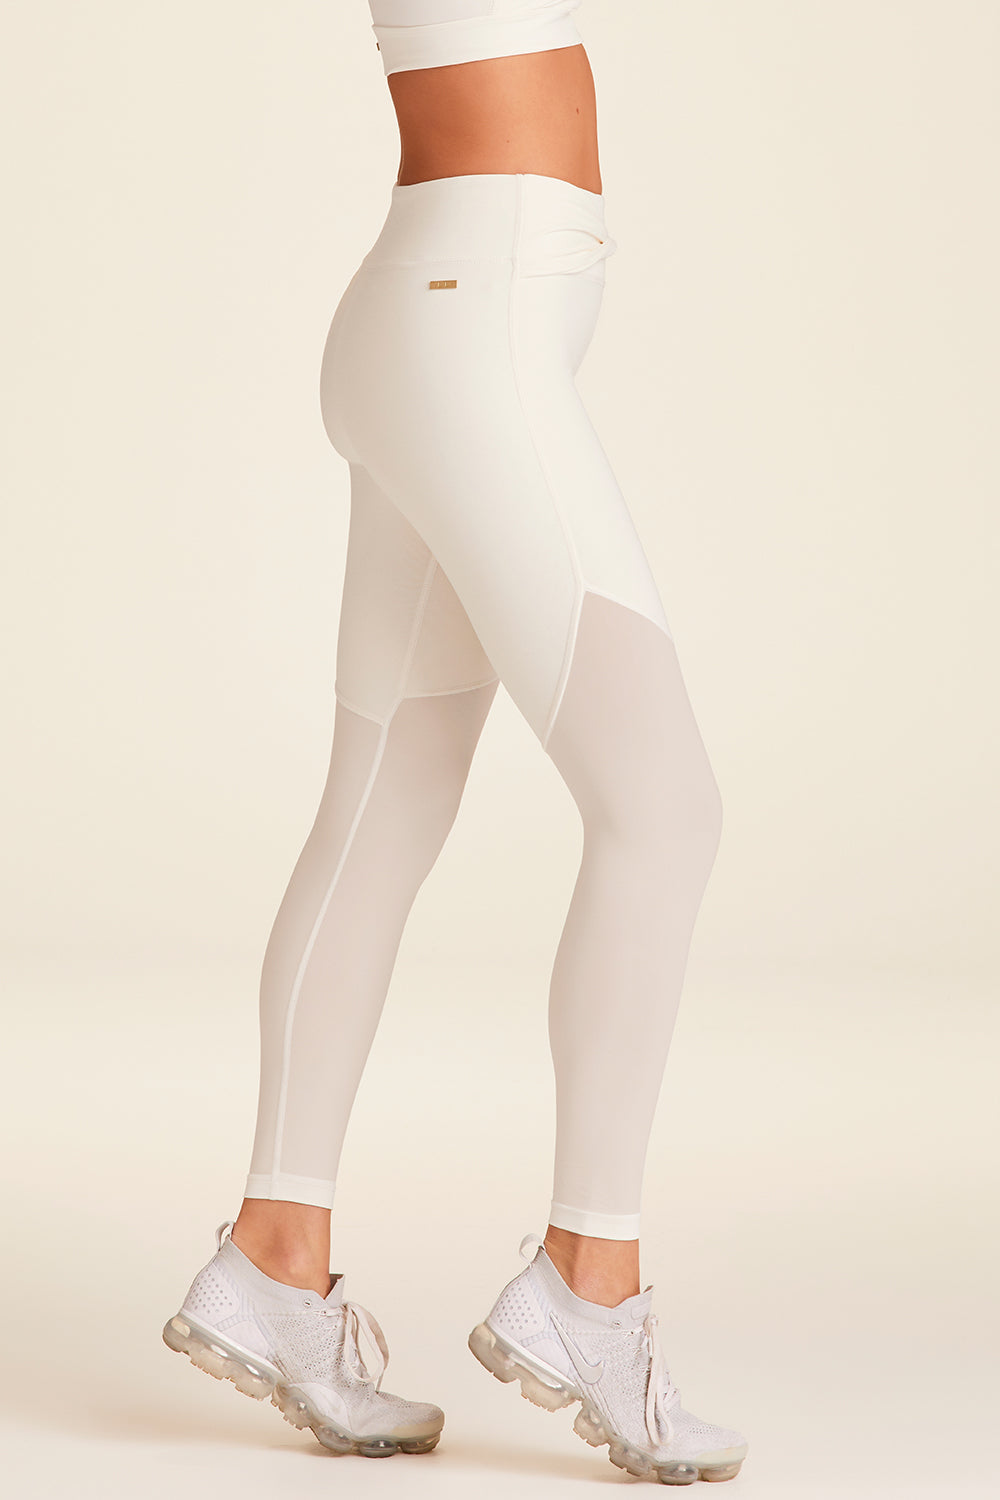 Side view of Alala Luxury Women's Athleisure tied bow tight in bone